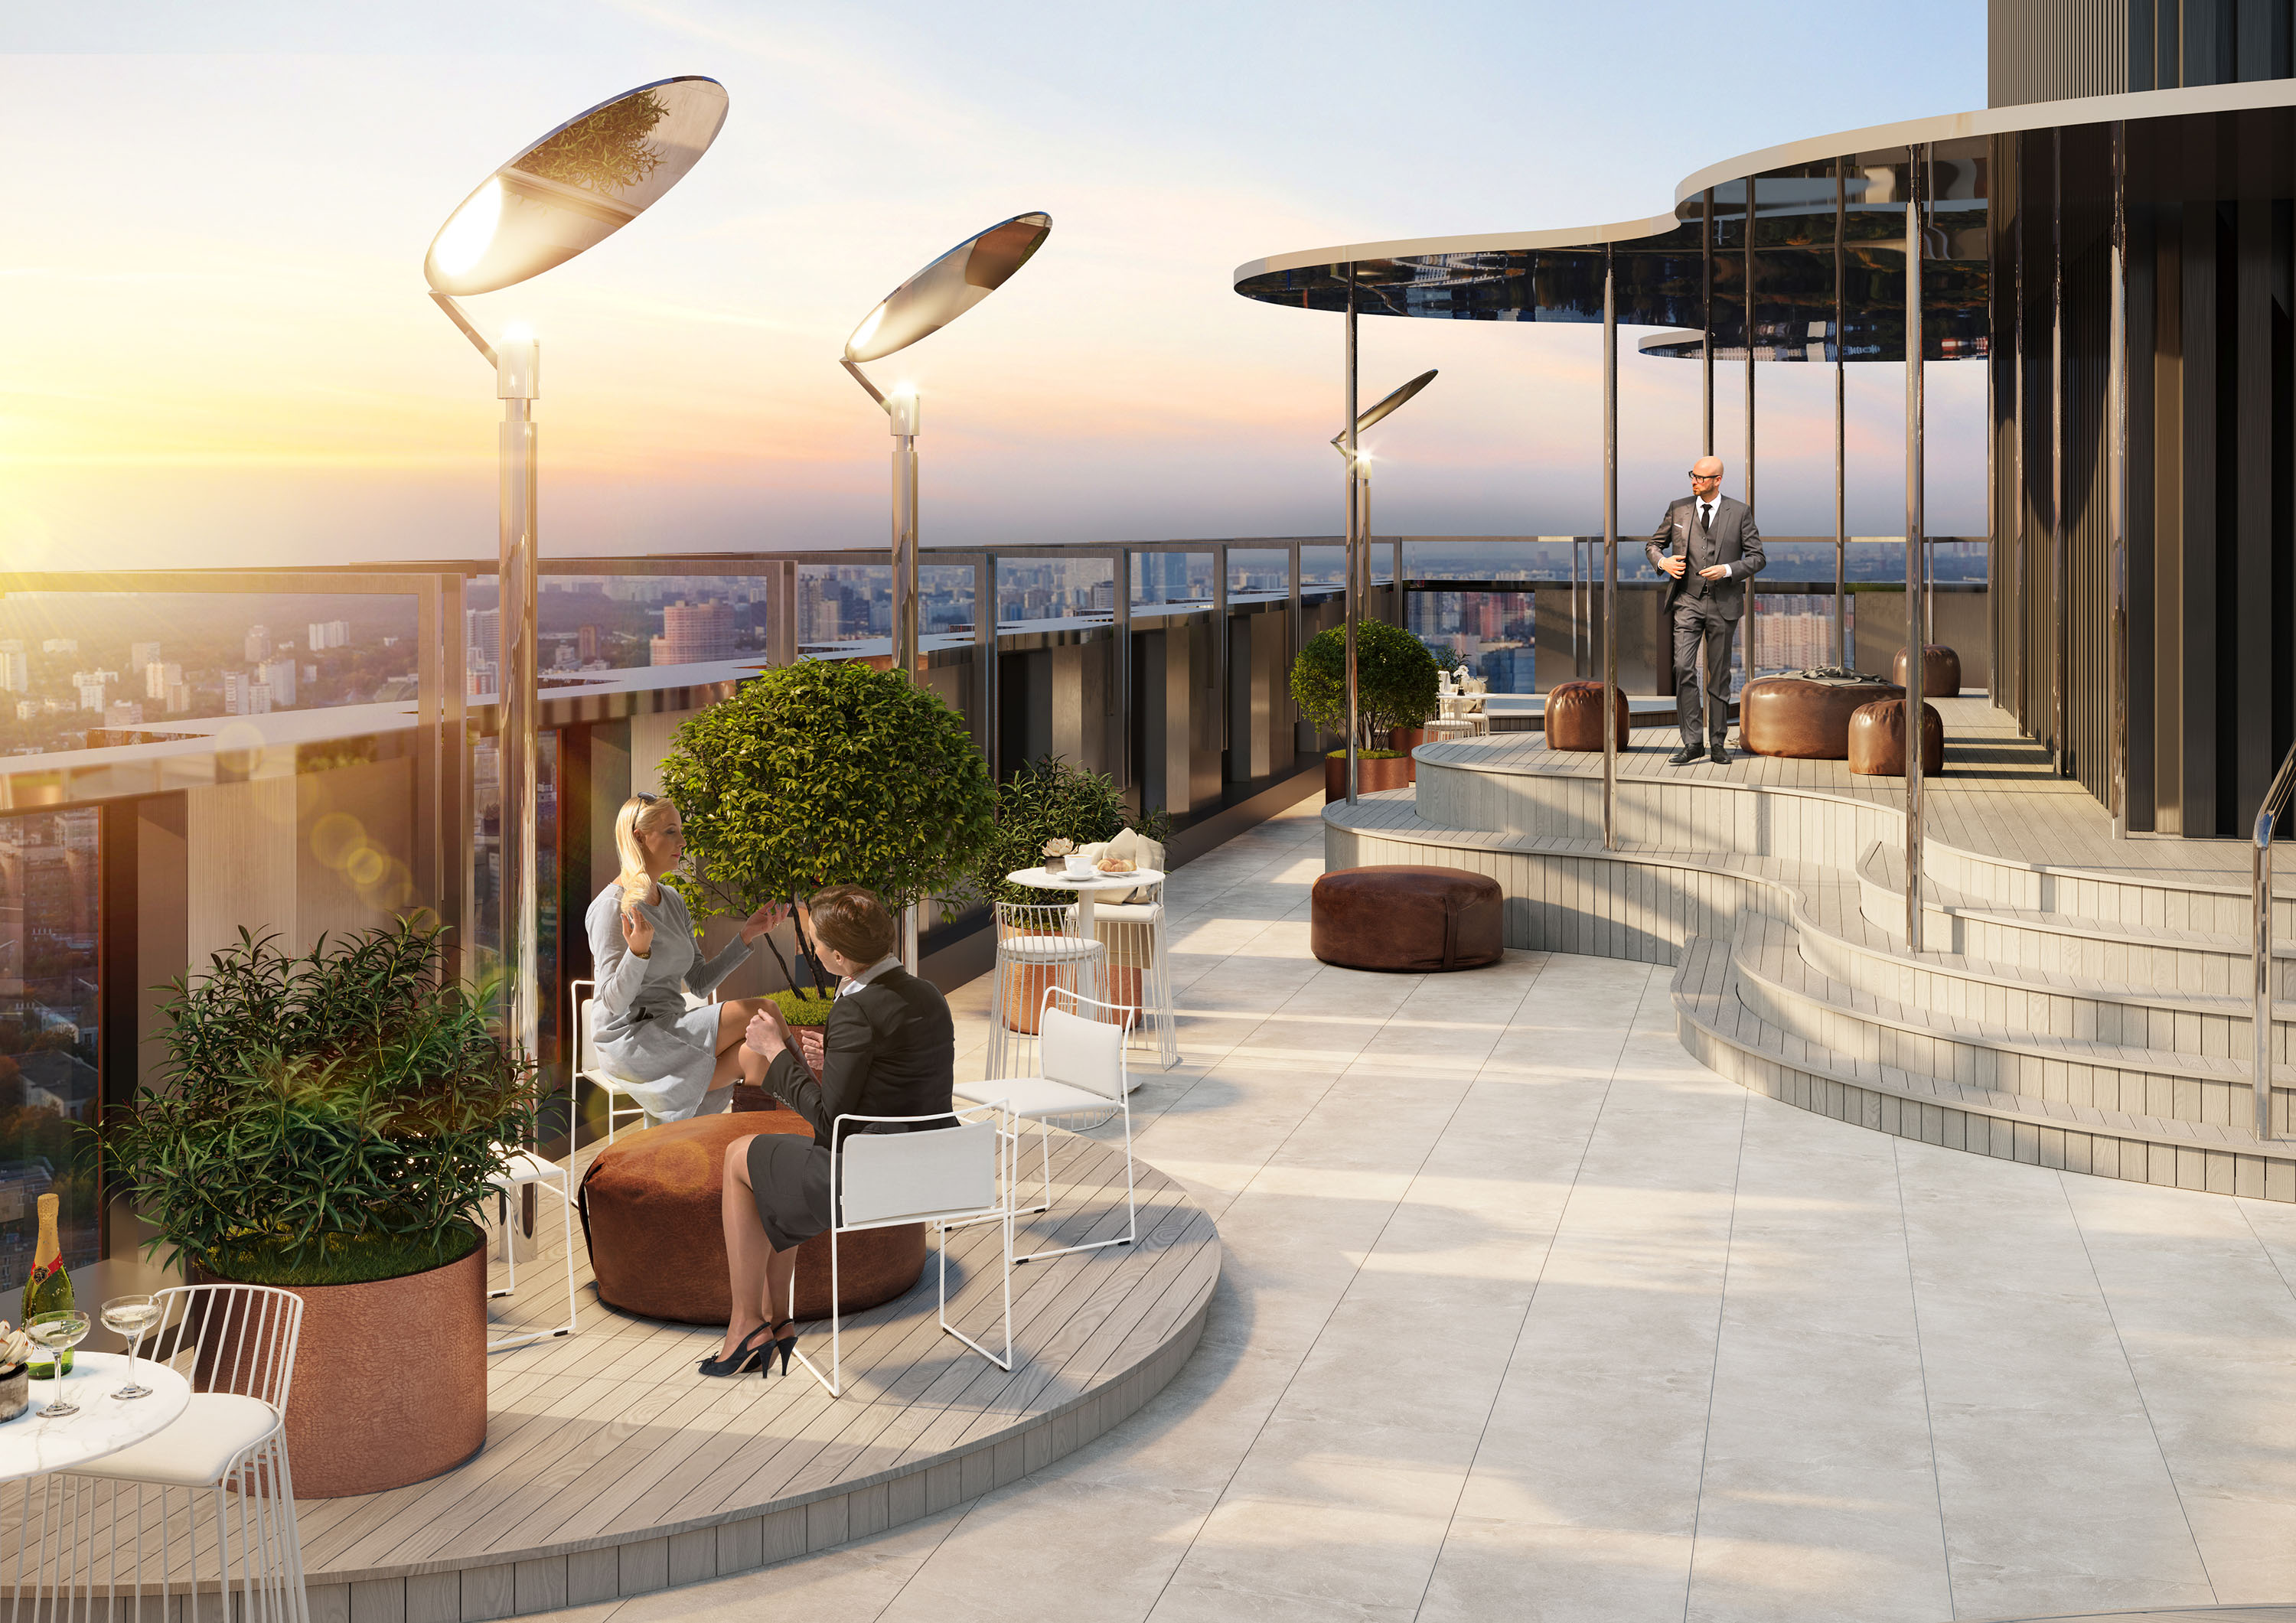 Yoga in the clouds - experience a new level of emotion on ENITEO's high-rise terraces